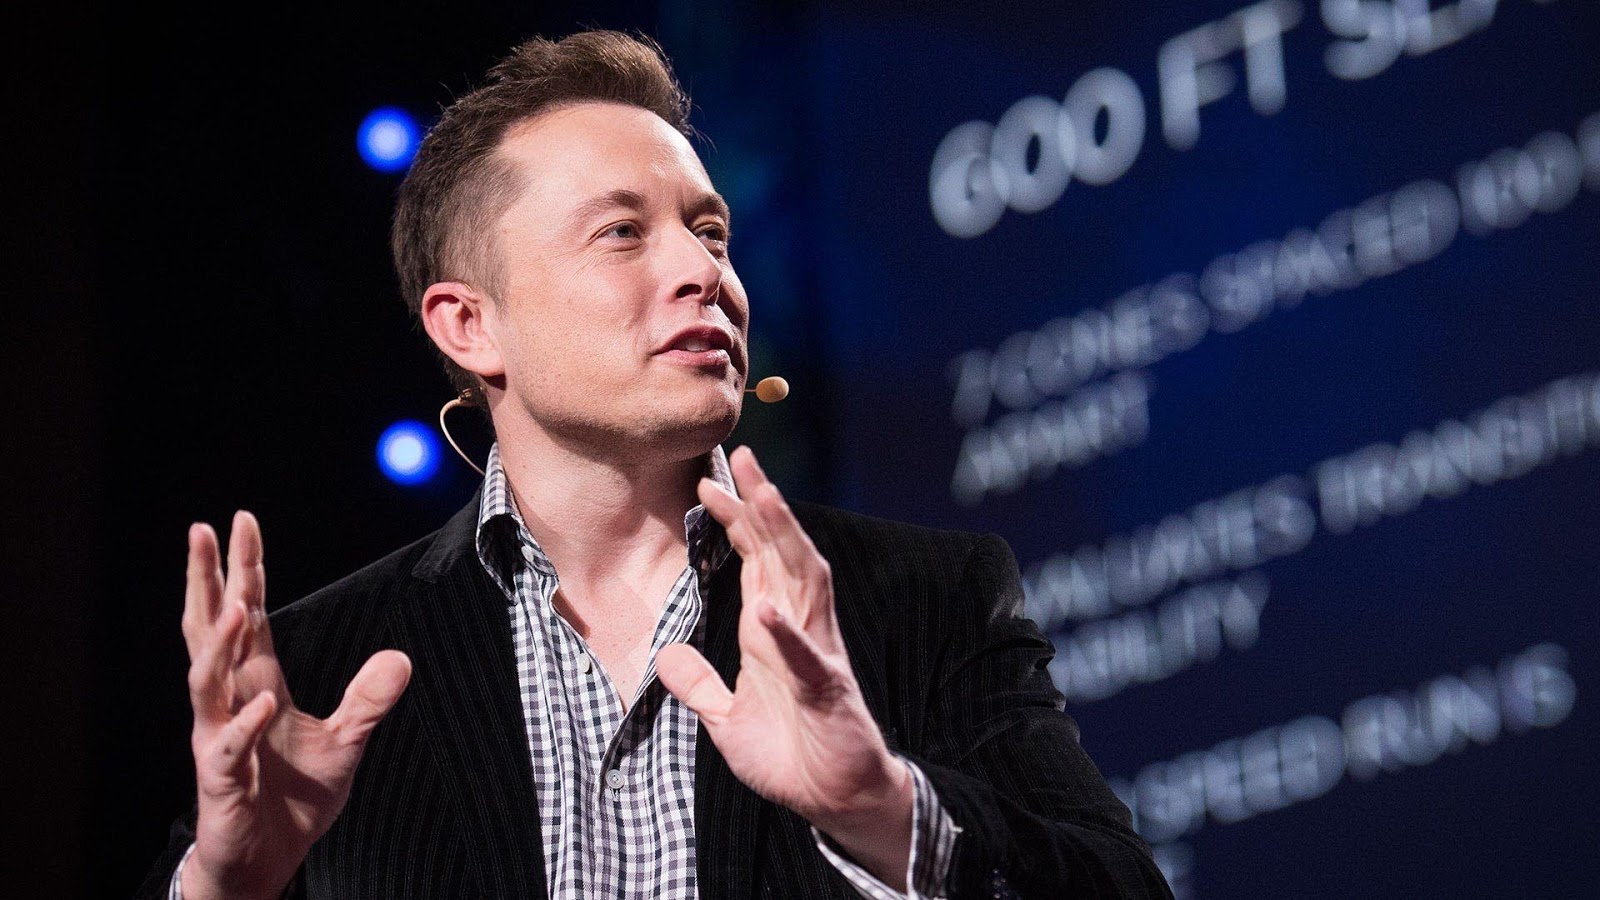 Top Ten Best Quotes By Elon Musk On Artificial Intelligence